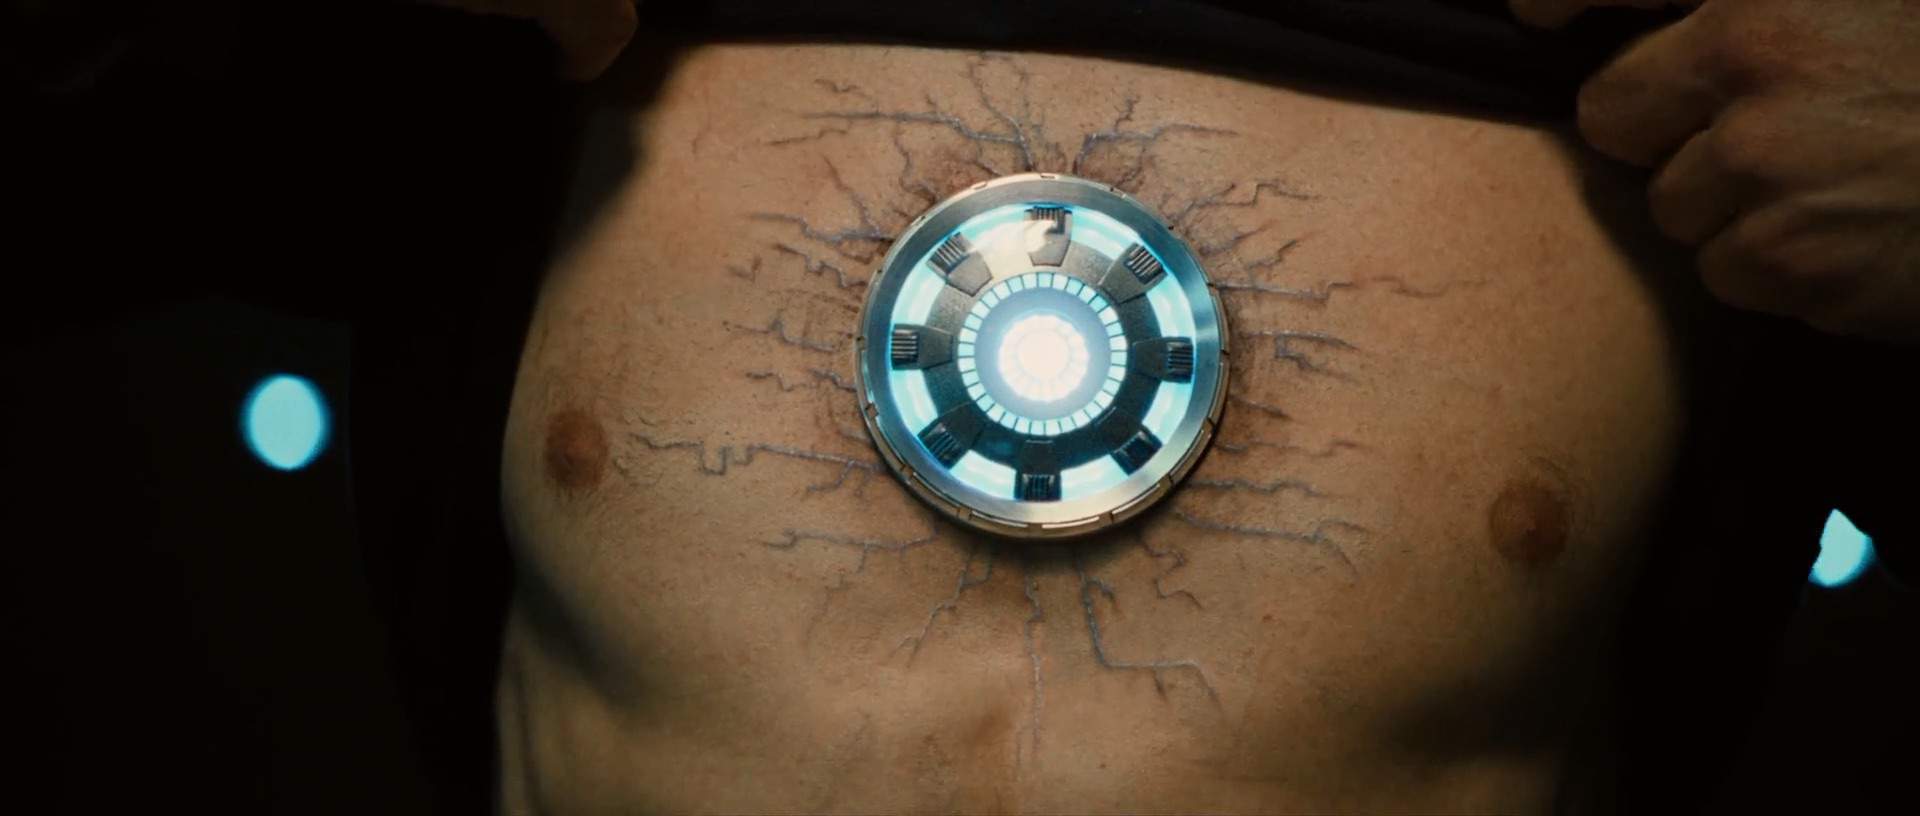 Iron Man Arc Reactor Tattoo Meaning - wide 6